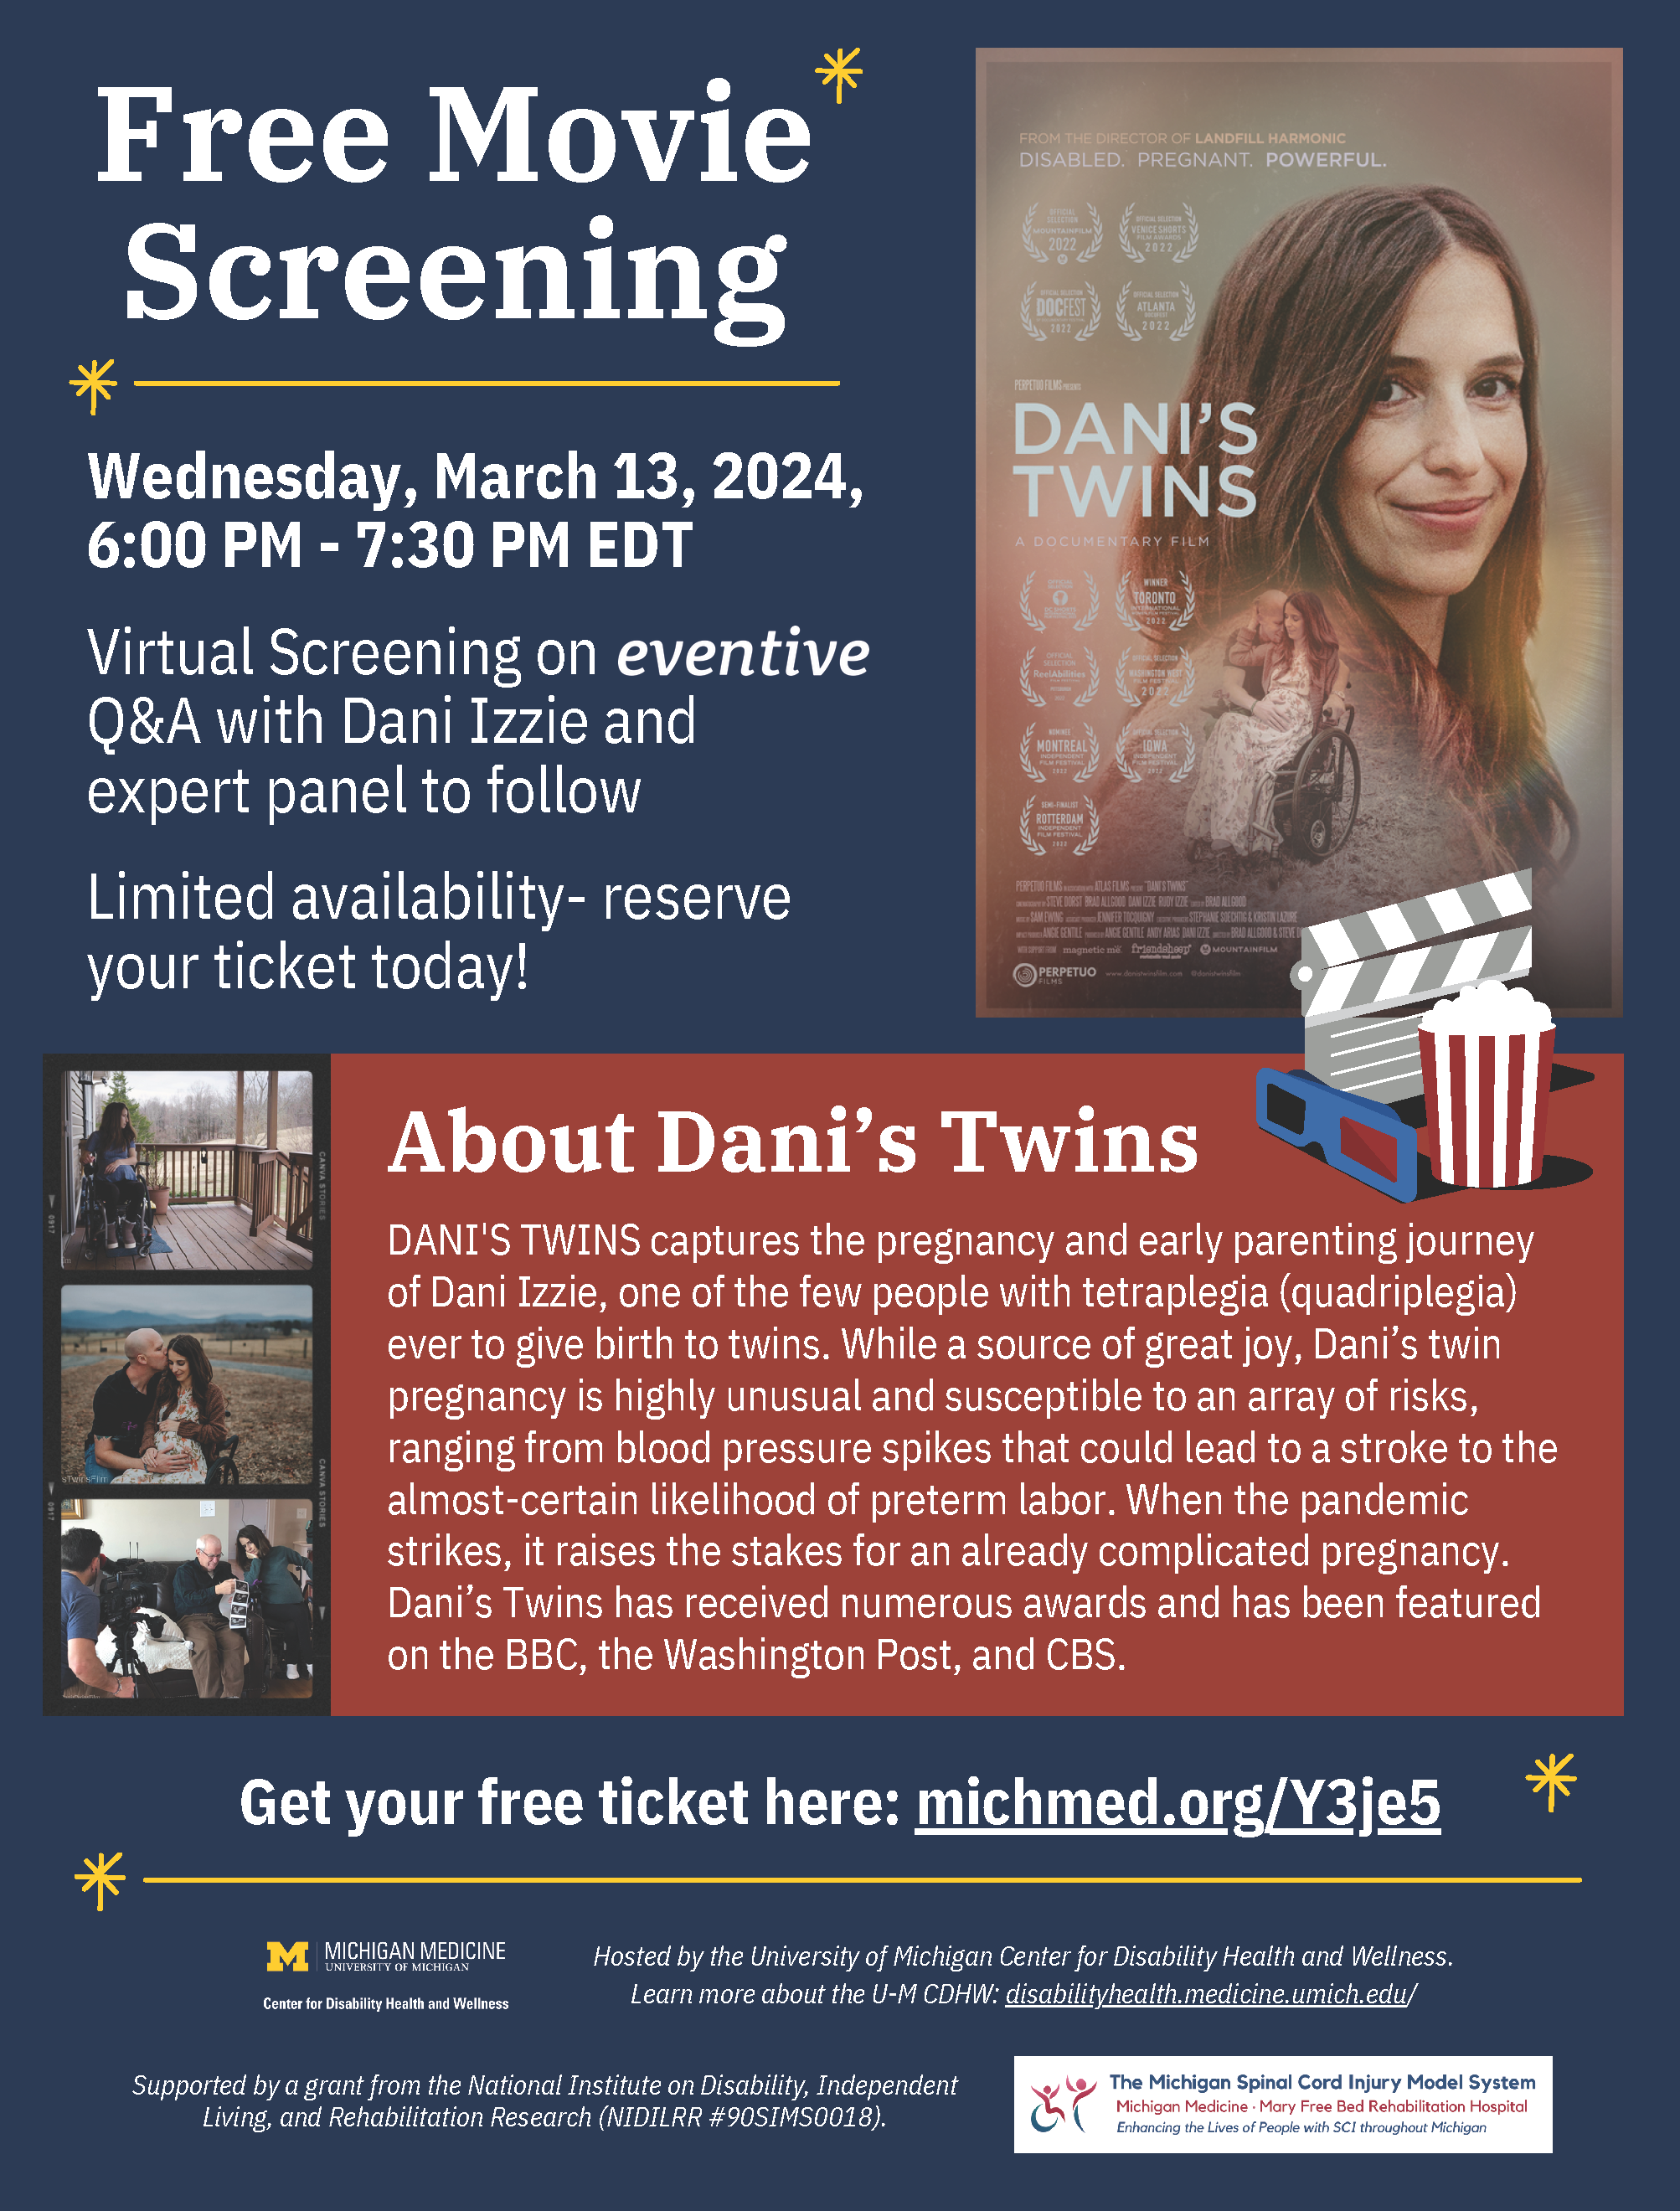 Flyer for a virtual movie screening of Dani's Twins. Full details are in the body text